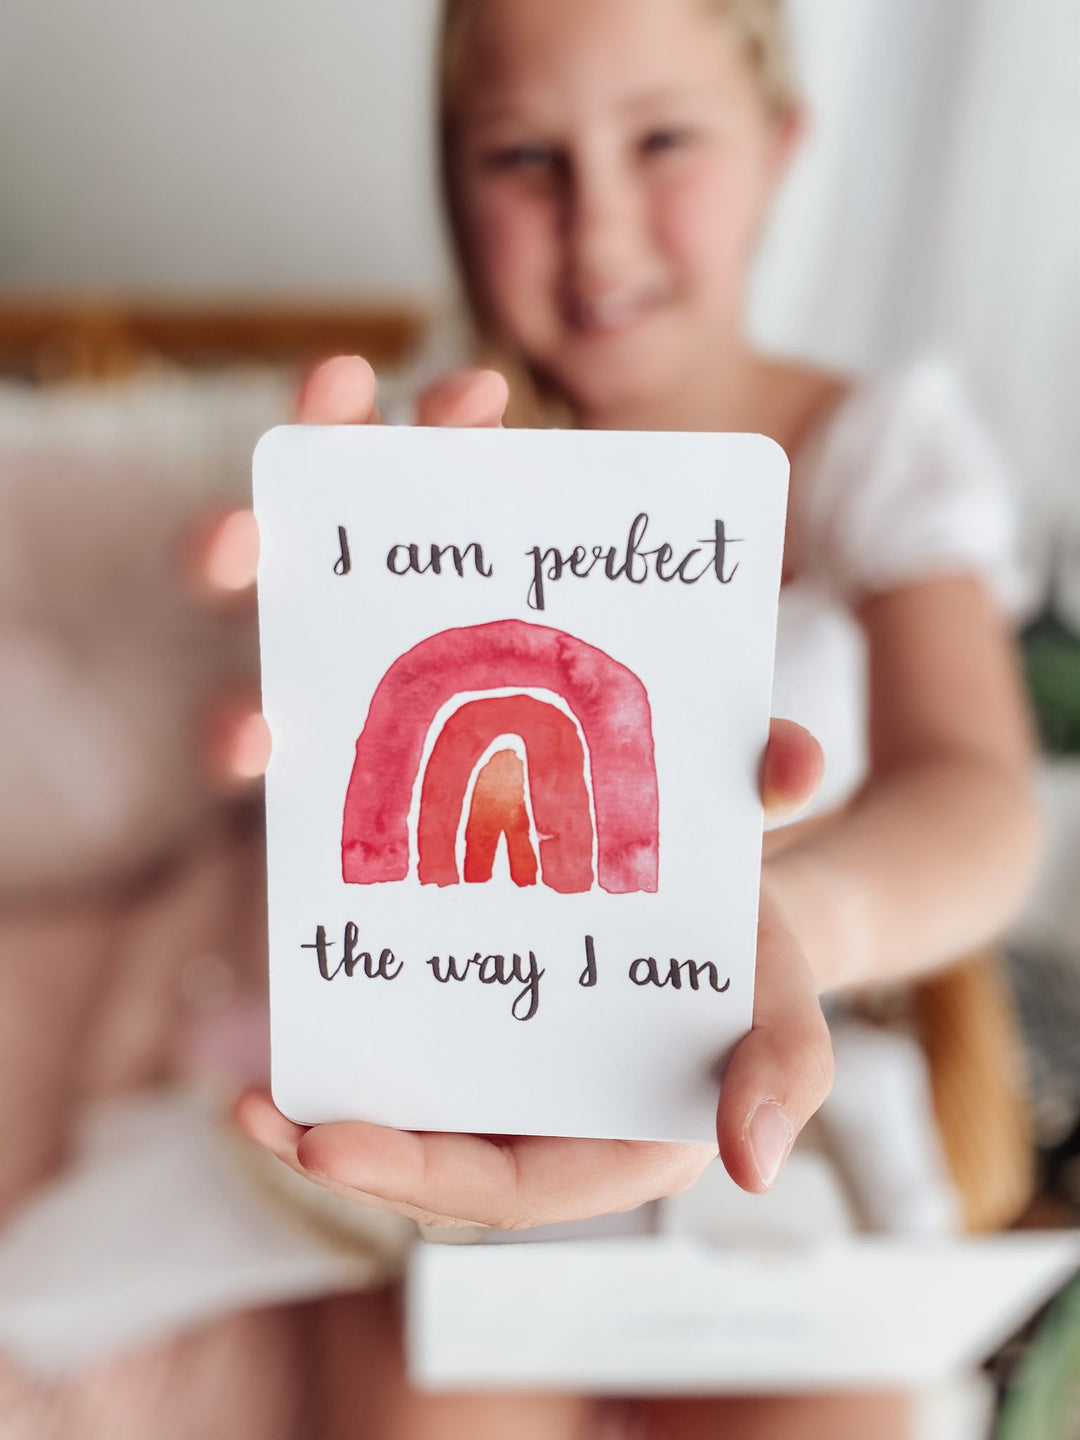 Young girl holding an affirmation card that says I am perfect the way I am